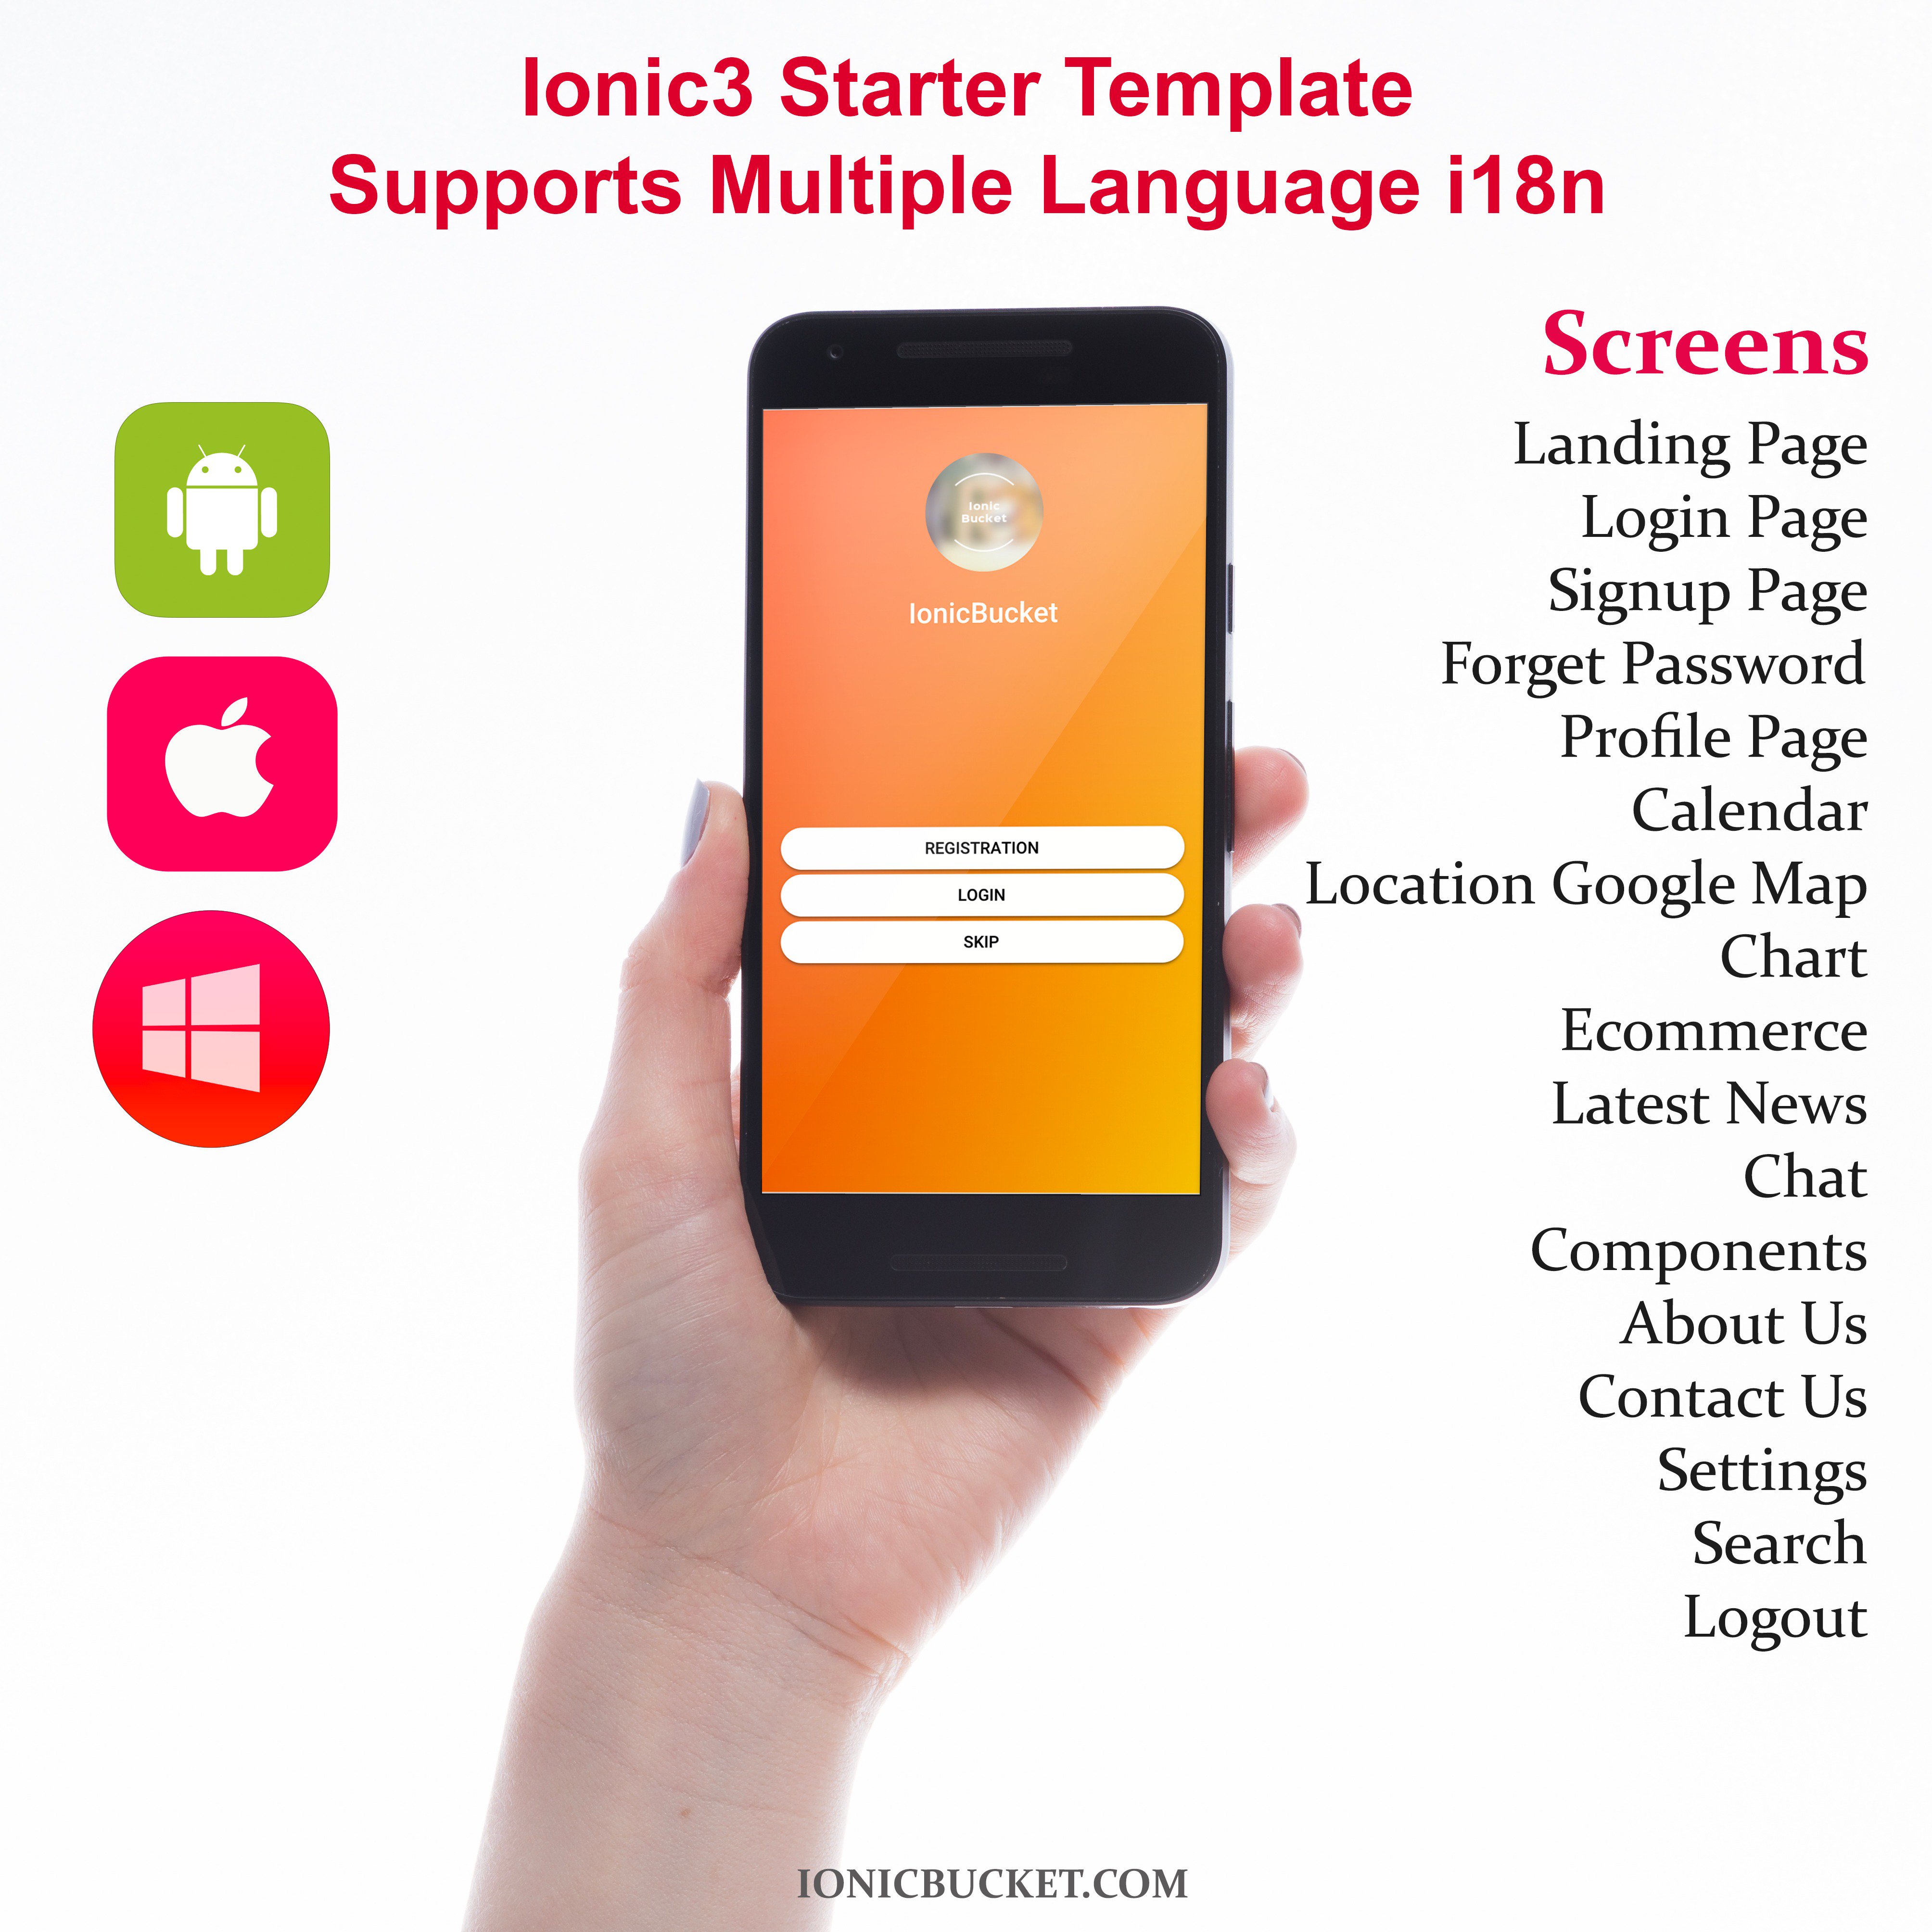 Chat mobile app ionic angular full tutorial step by step